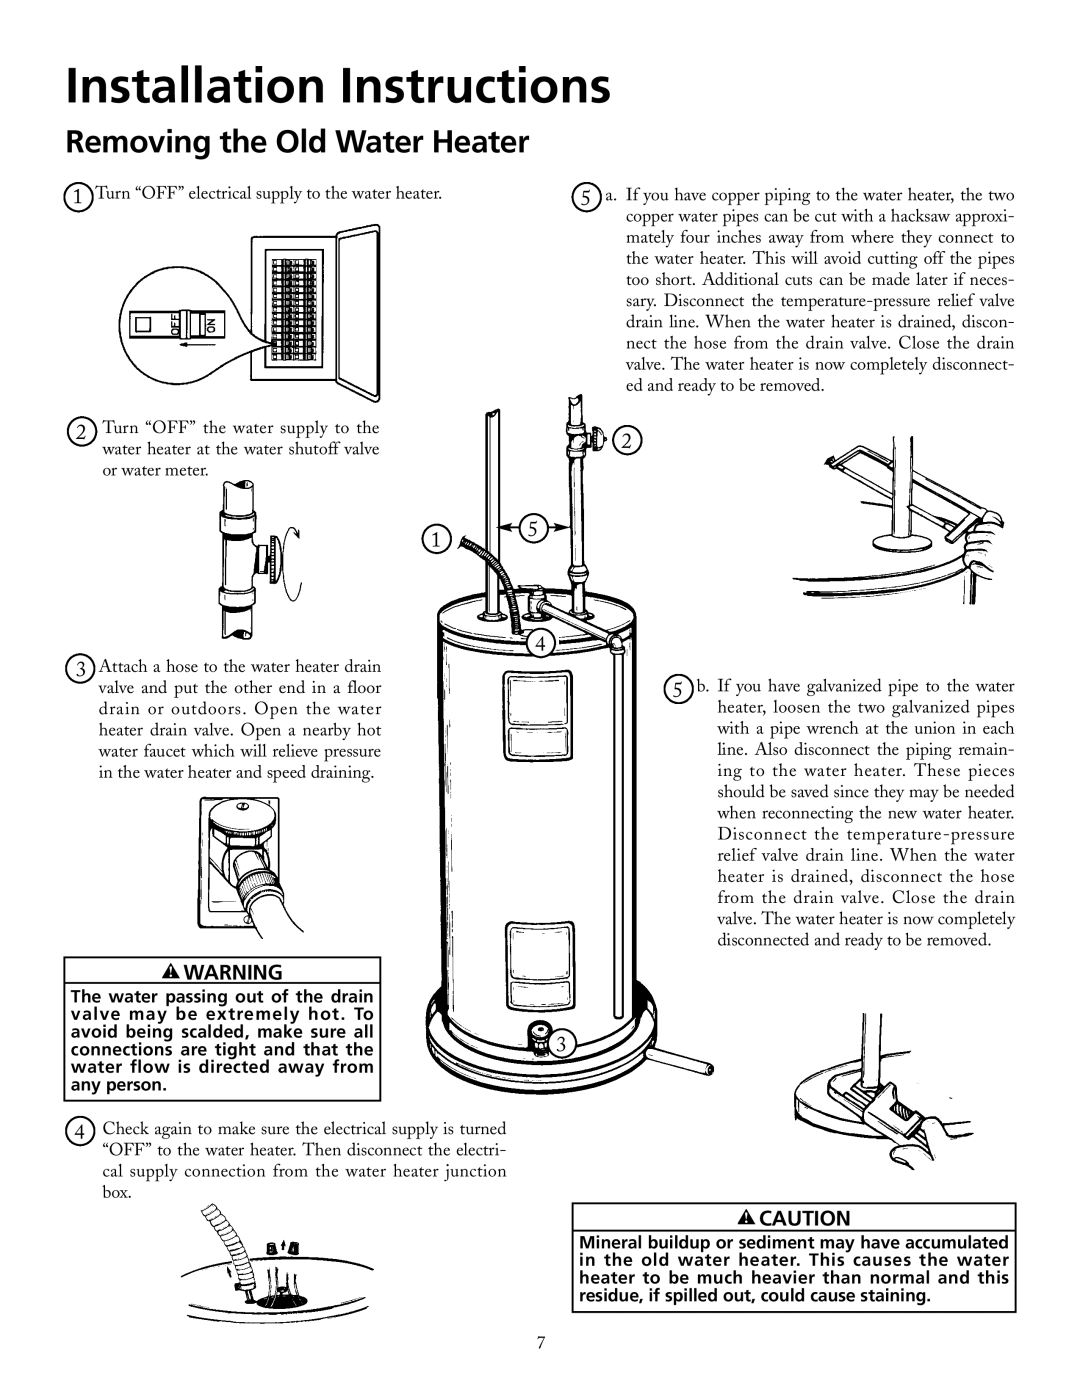 Maytag HRE21282PC, HRE21250PC manual Installation Instructions, Removing the Old Water Heater 